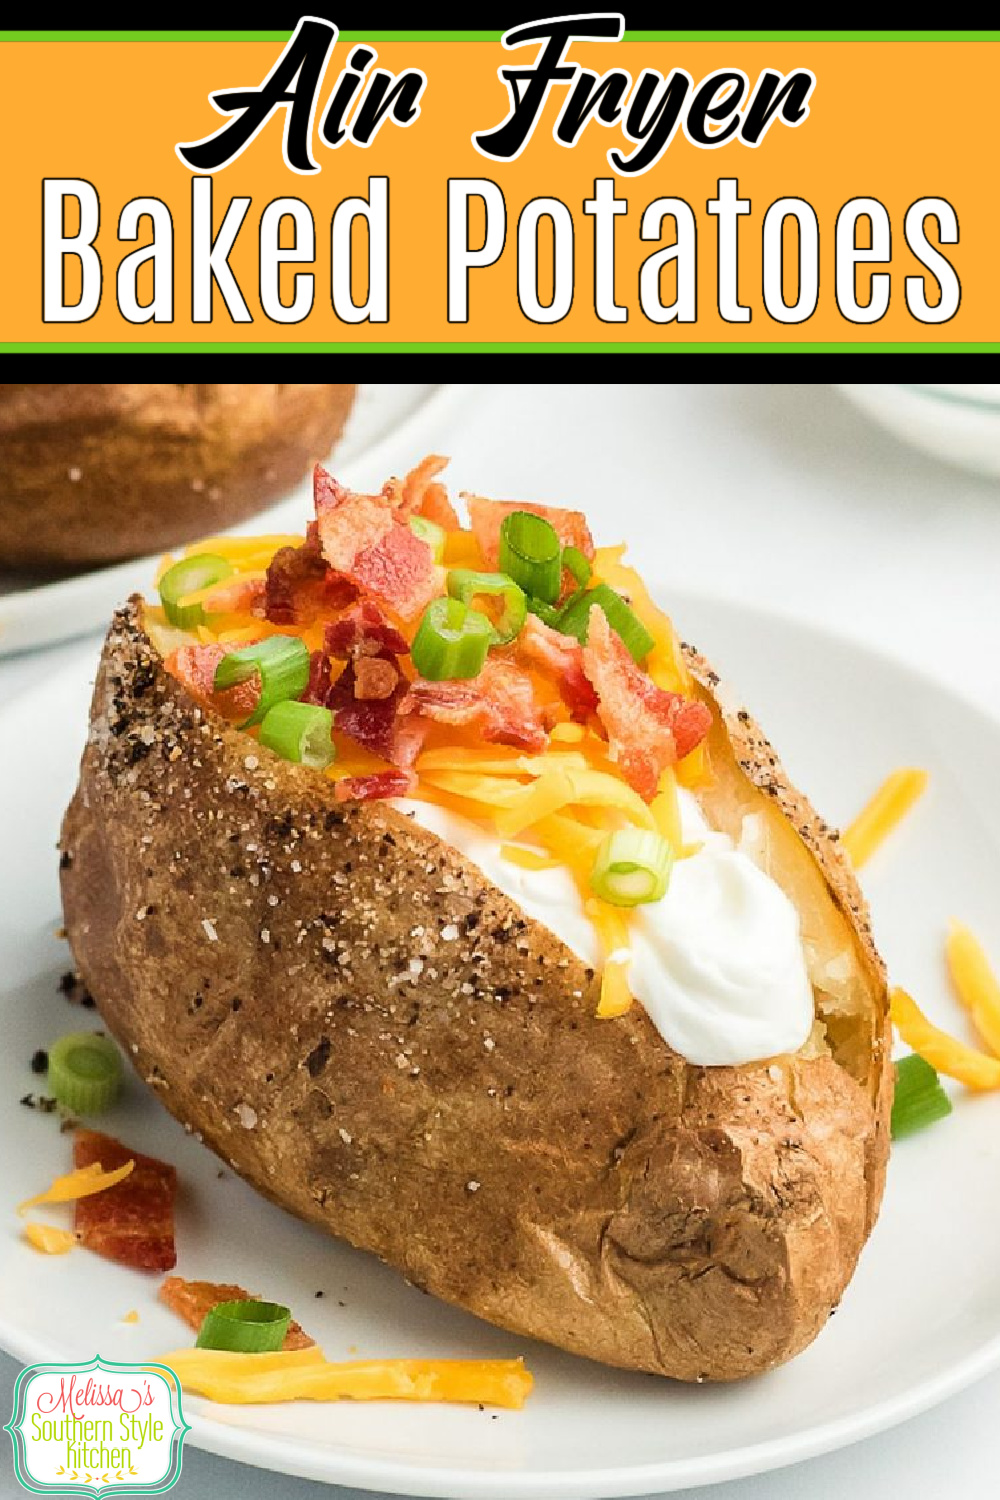 These Air Fryer Baked Potatoes are creamy and fluffy on the inside with a crisp seasoned skin, making them the ideal side dish for any entree #airfryerbakedpotatoes #airfryerrecipes #airfryerpotatoes #bakedpotatoes #loadedbakedpotatoes #sidedishrecipes #southernrecipes #potatoes via @melissasssk